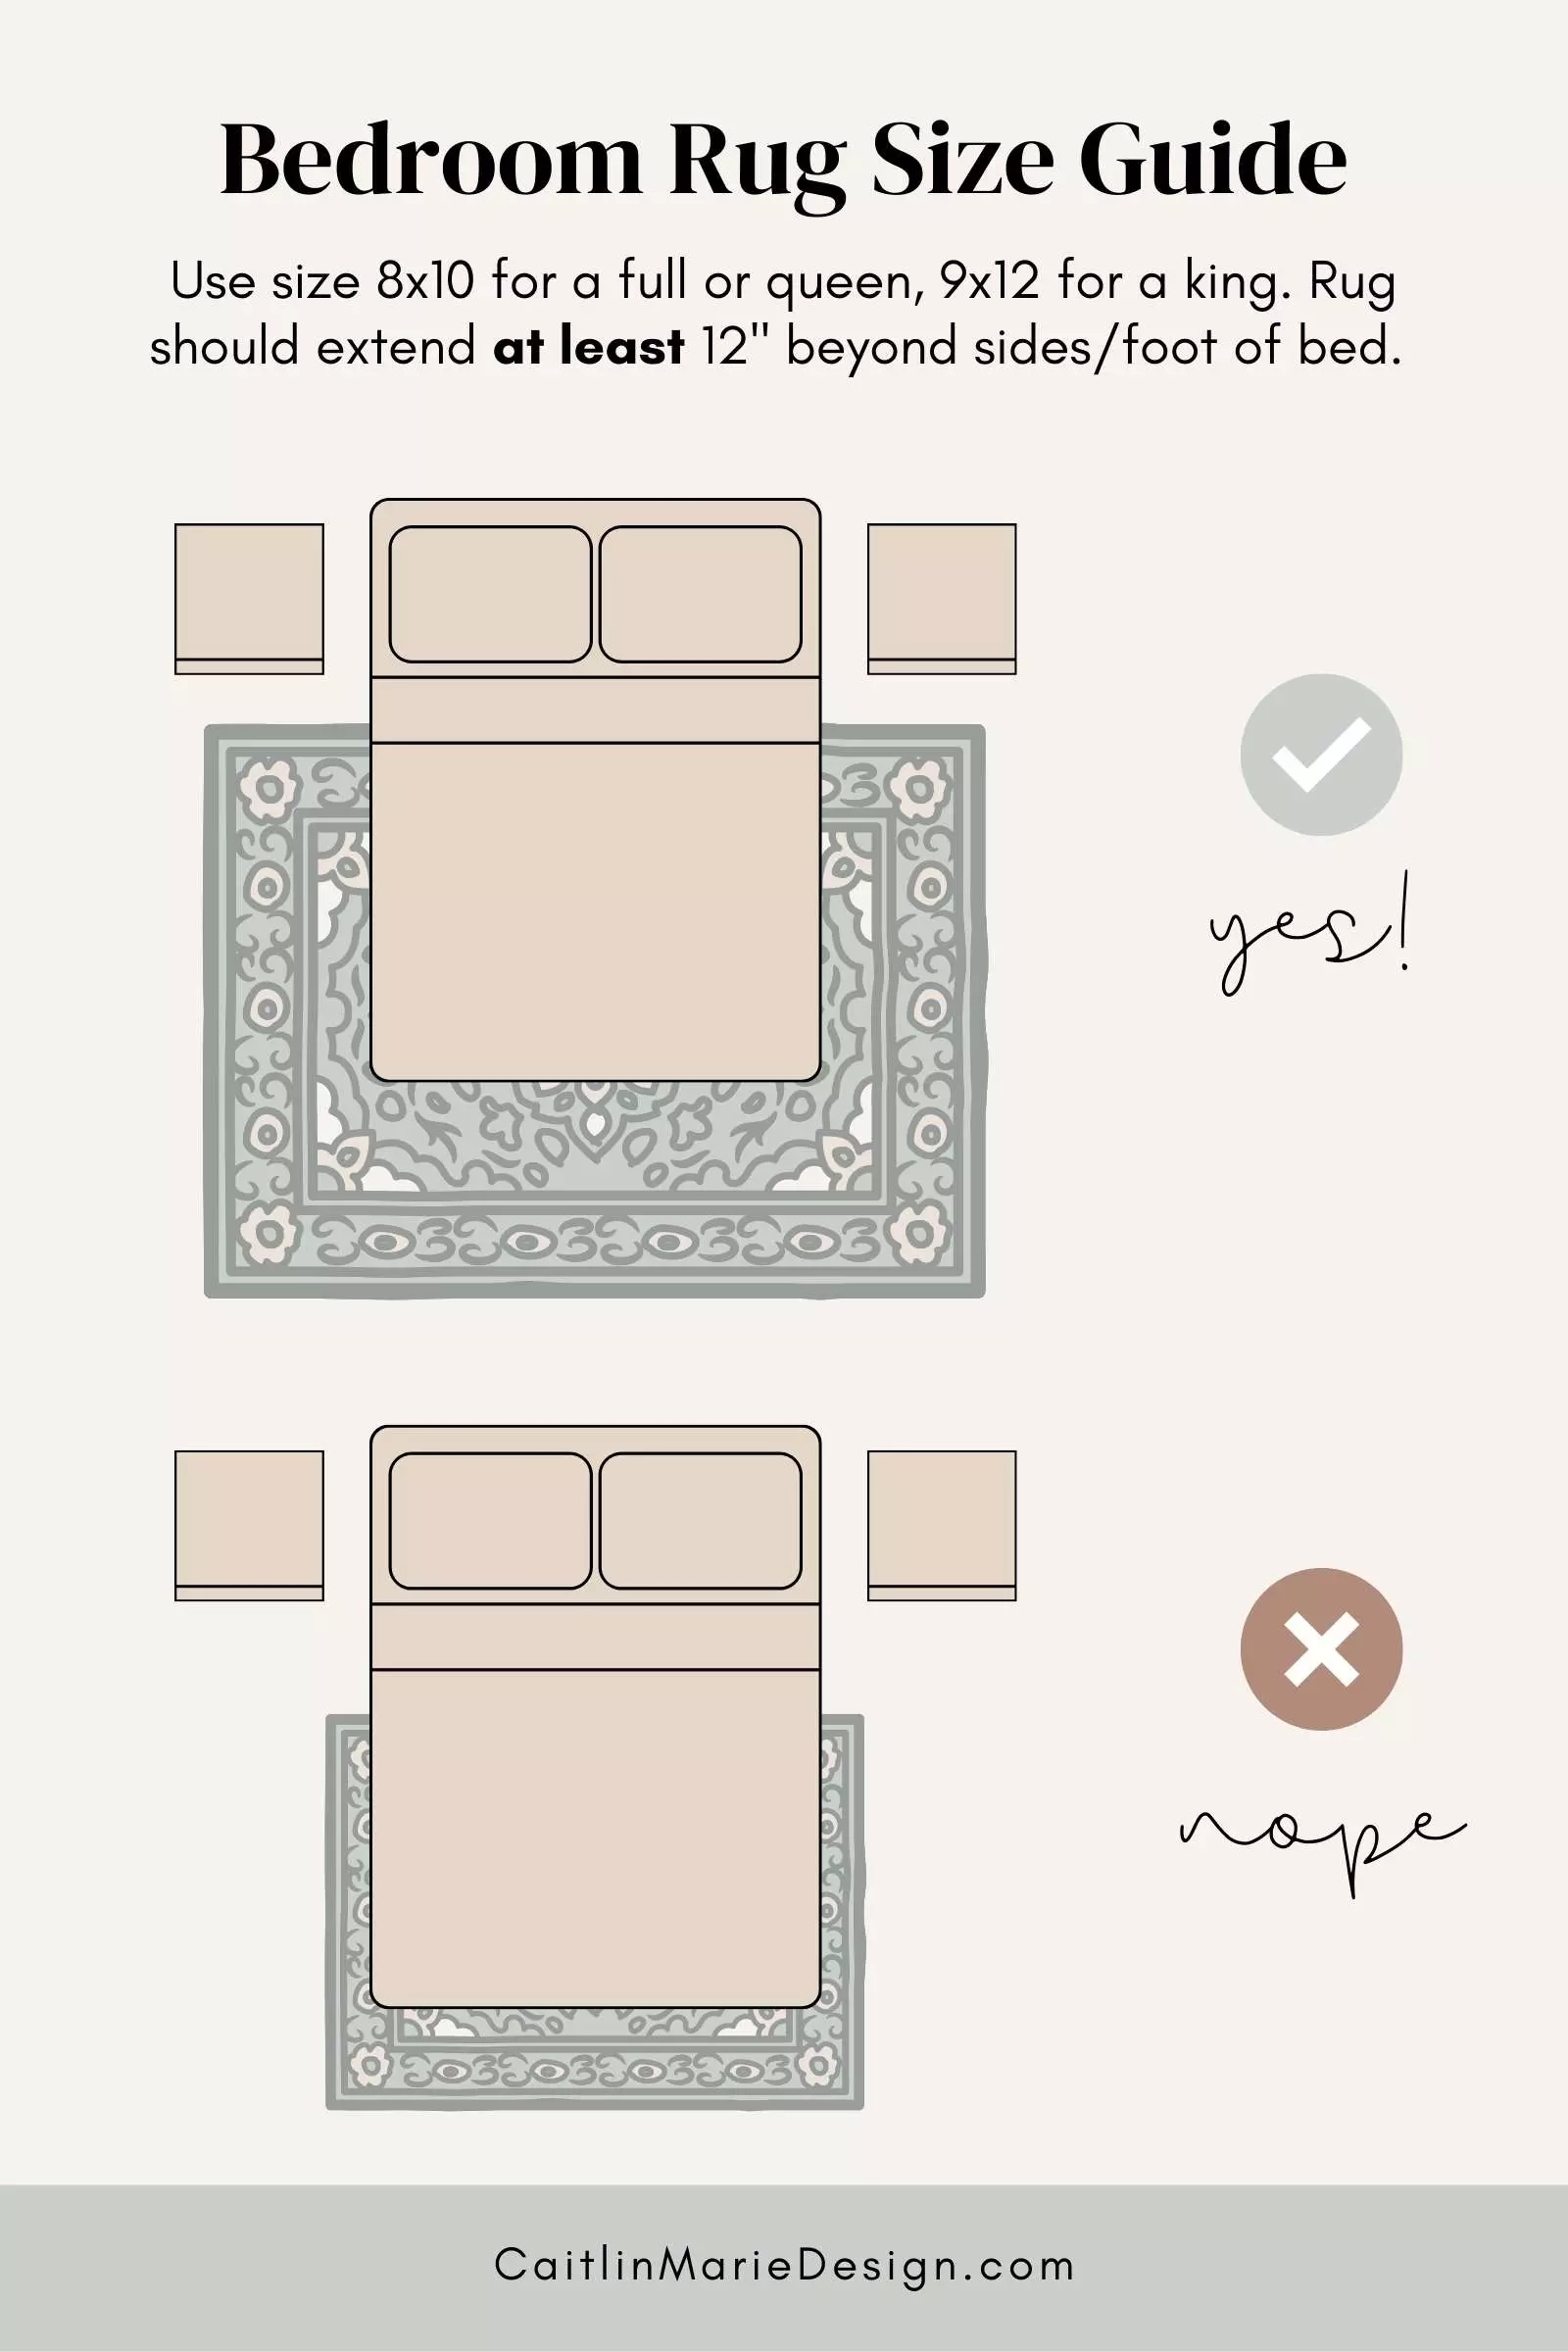 Bedroom Rug Size Guide: Use size 8x10 for a full or queen, 9x12 for a king. Rug should extend at least 12" beyond sides/foot of bed.